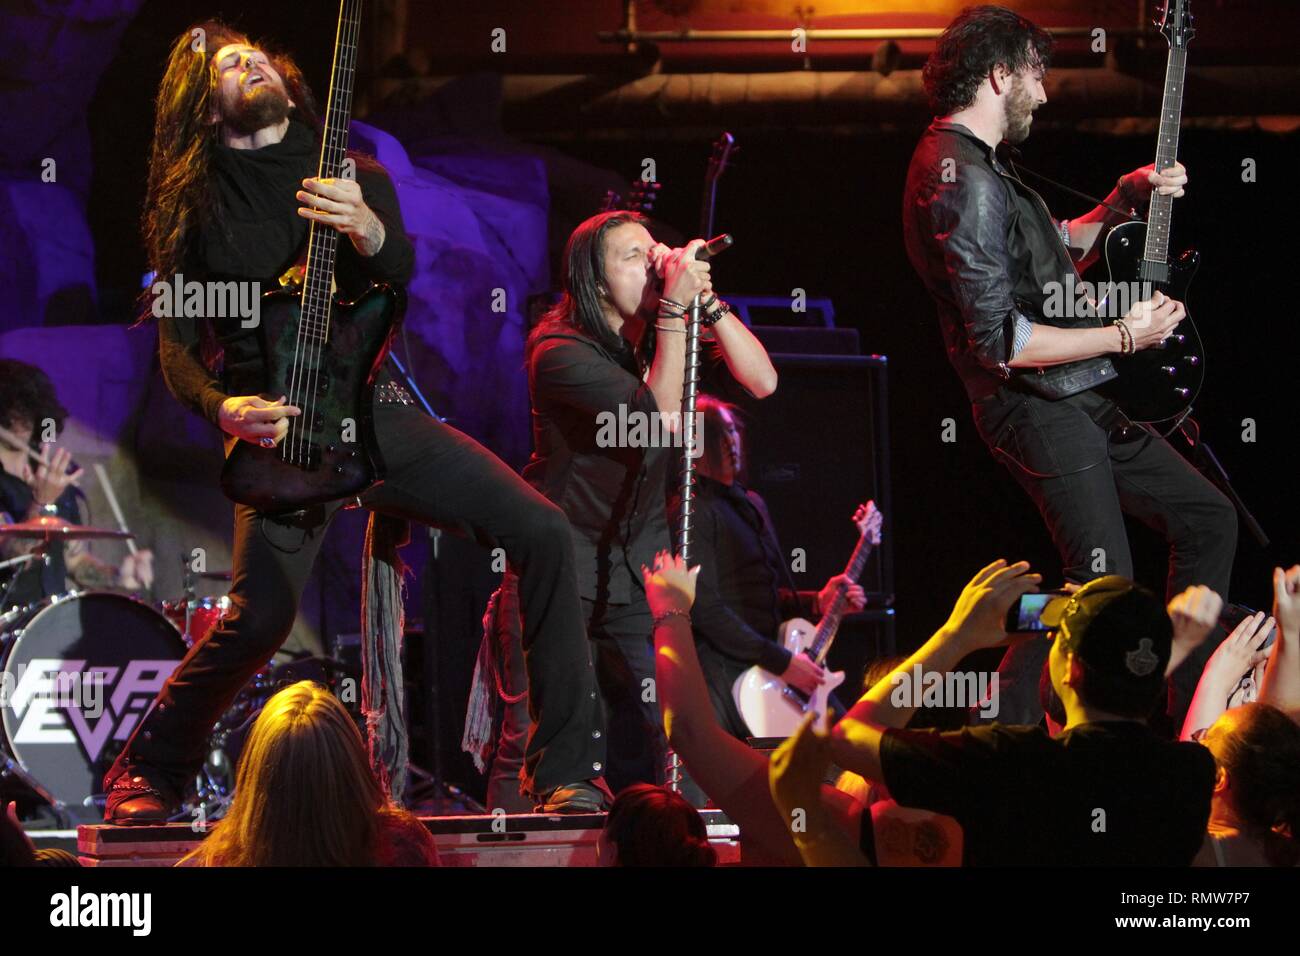 Pop Evil band members are shown performing on stage during 'live' concert appearance. Stock Photo